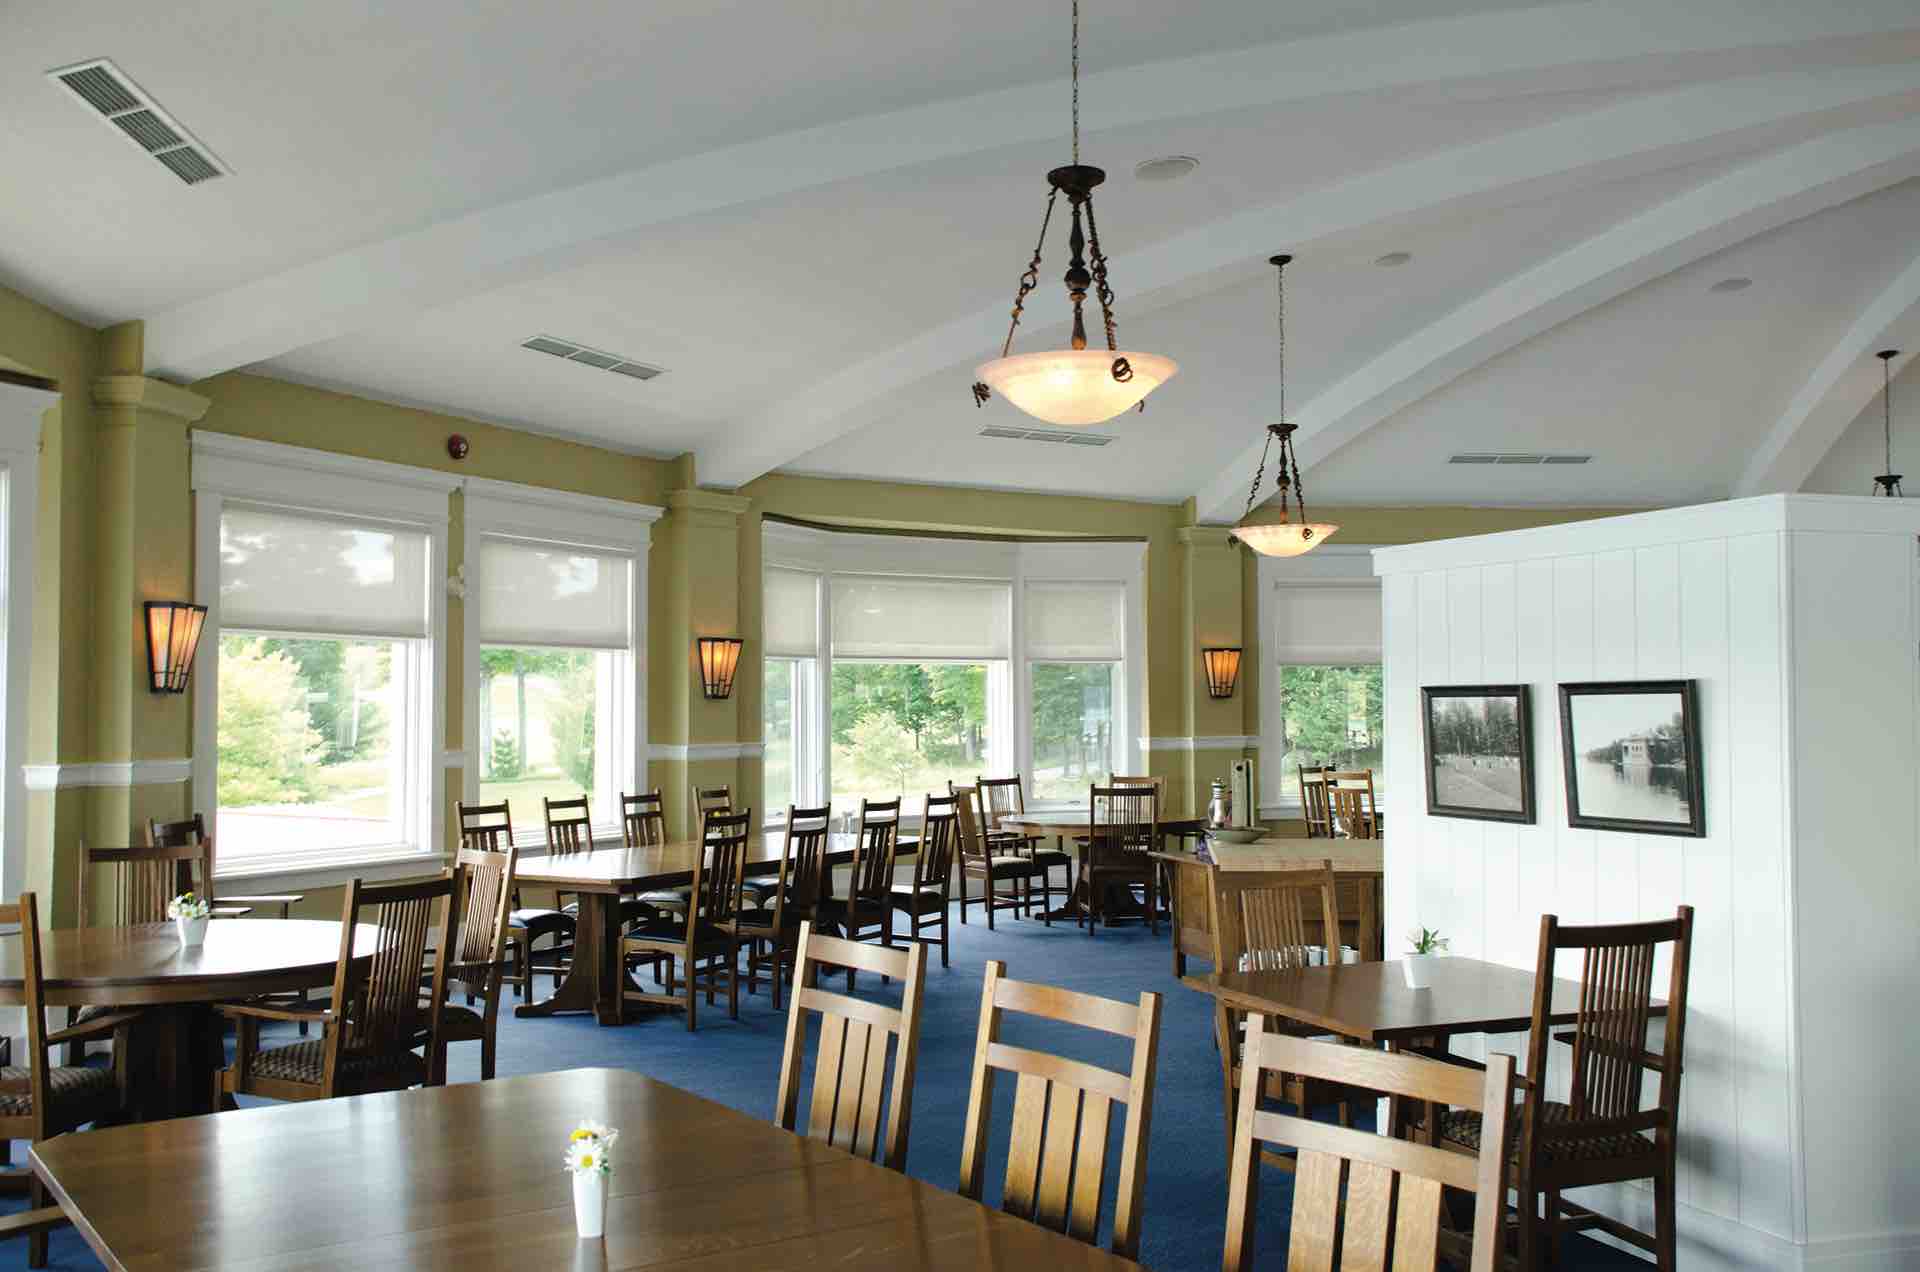 The interior of the dining room at Bigwin Island